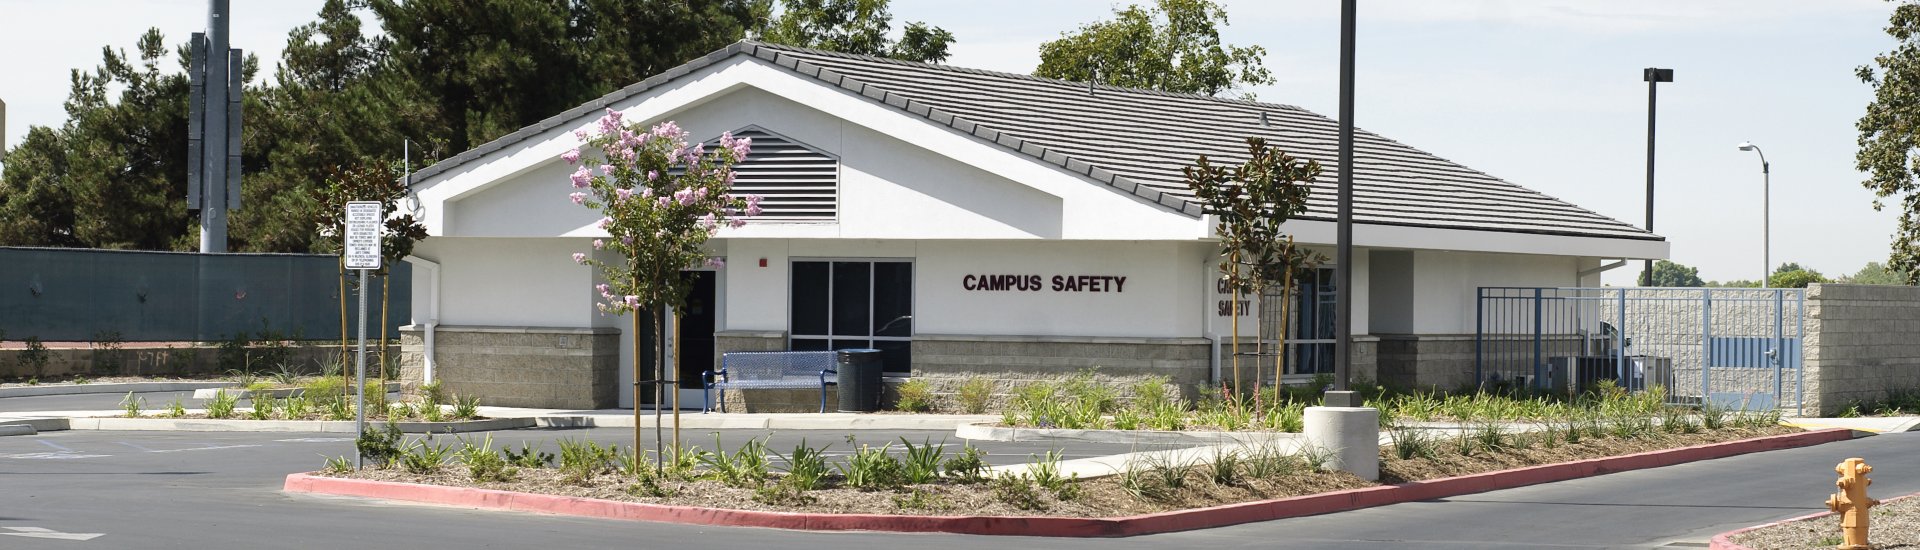 Campus Safety building located at the entry of the main parking lot at Citrus Avenue and Foothill Blvd.